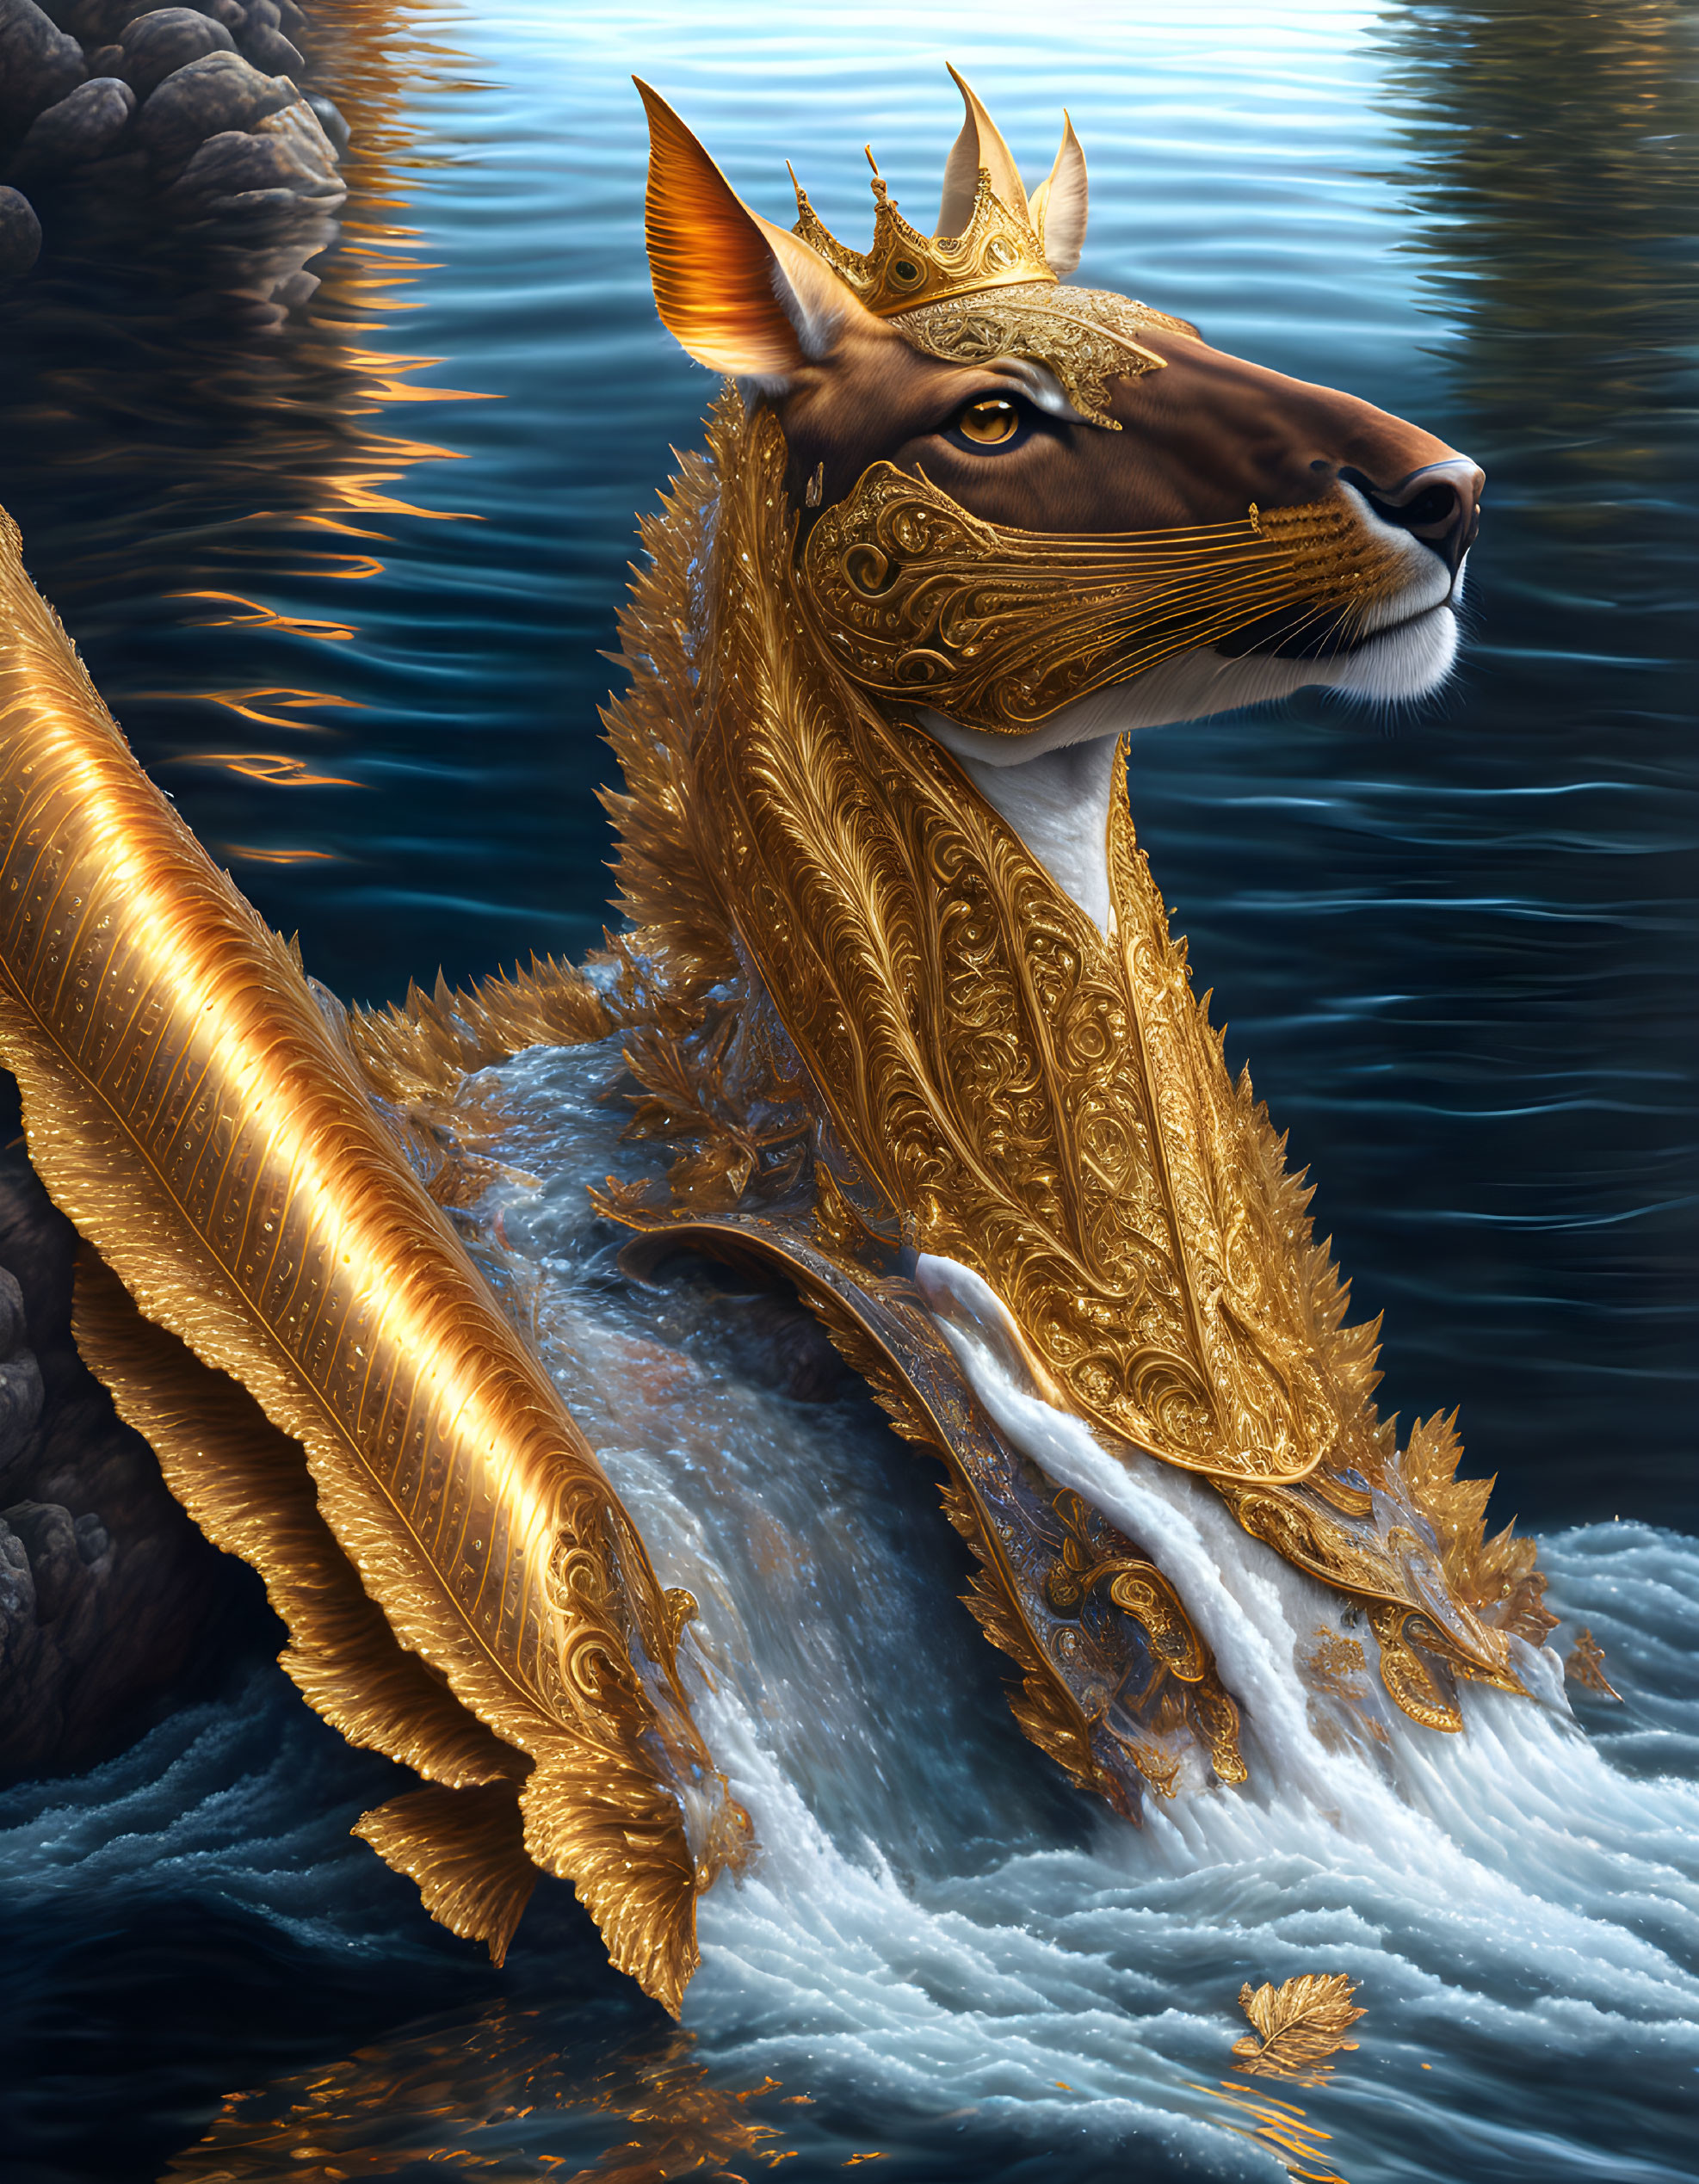 Golden Egyptian Cat-Headed Dragon Emerges from Water